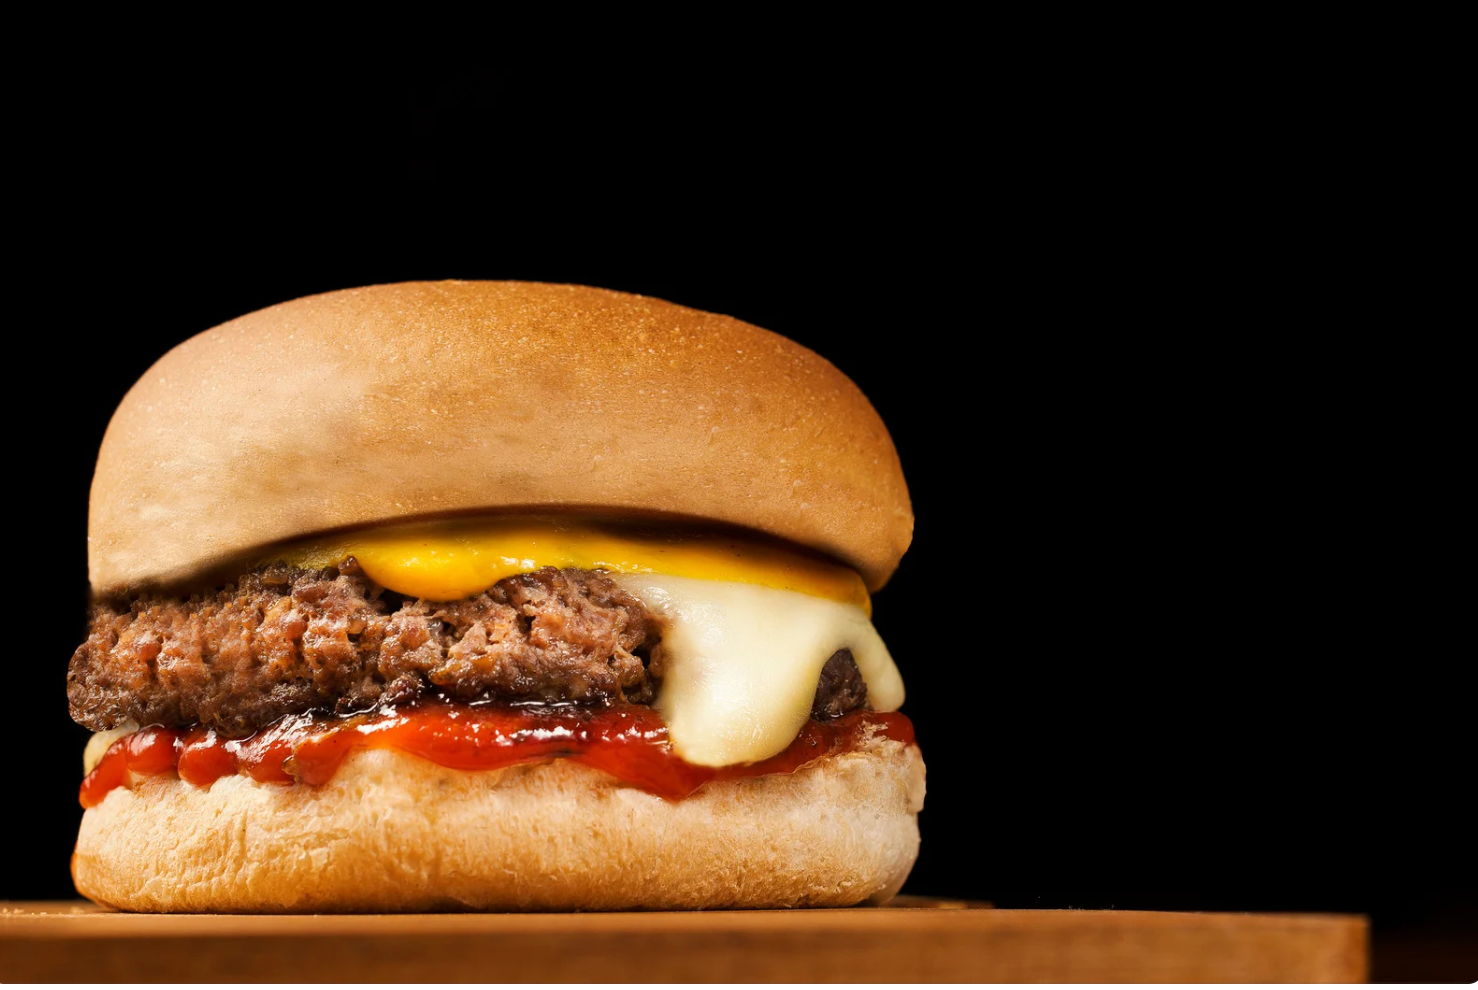 McDonald's is an example of a company that has mastered scale, particularly
in the distribution of
cheeseburgers.